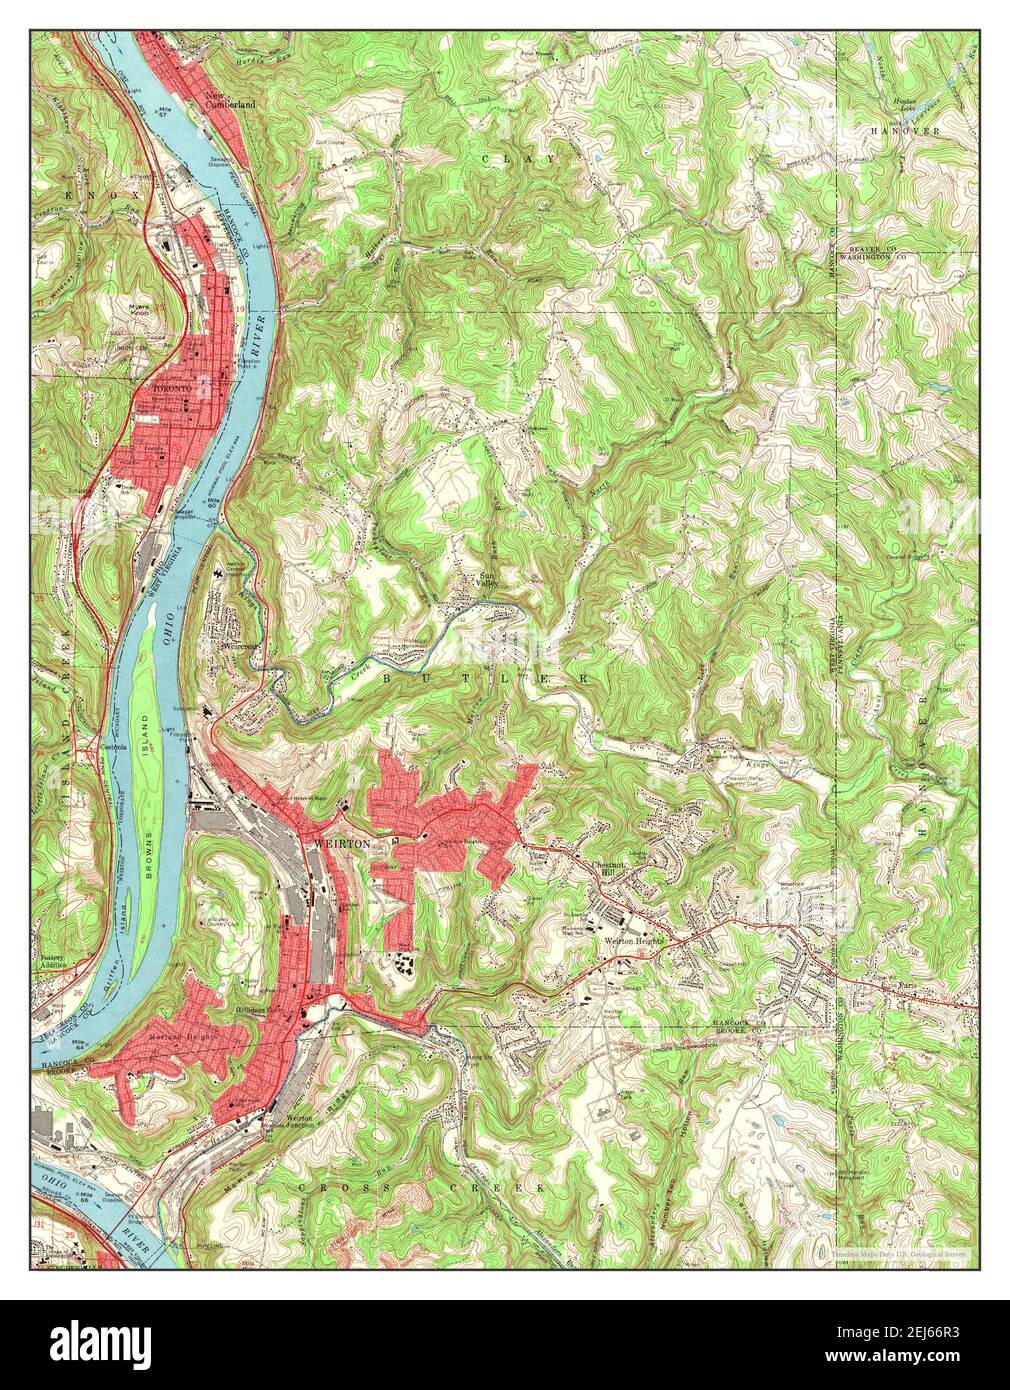 Weirton, West Virginia, map 1968, 1:24000, United States of America by Timeless Maps, data U.S. Geological Survey Stock Photo